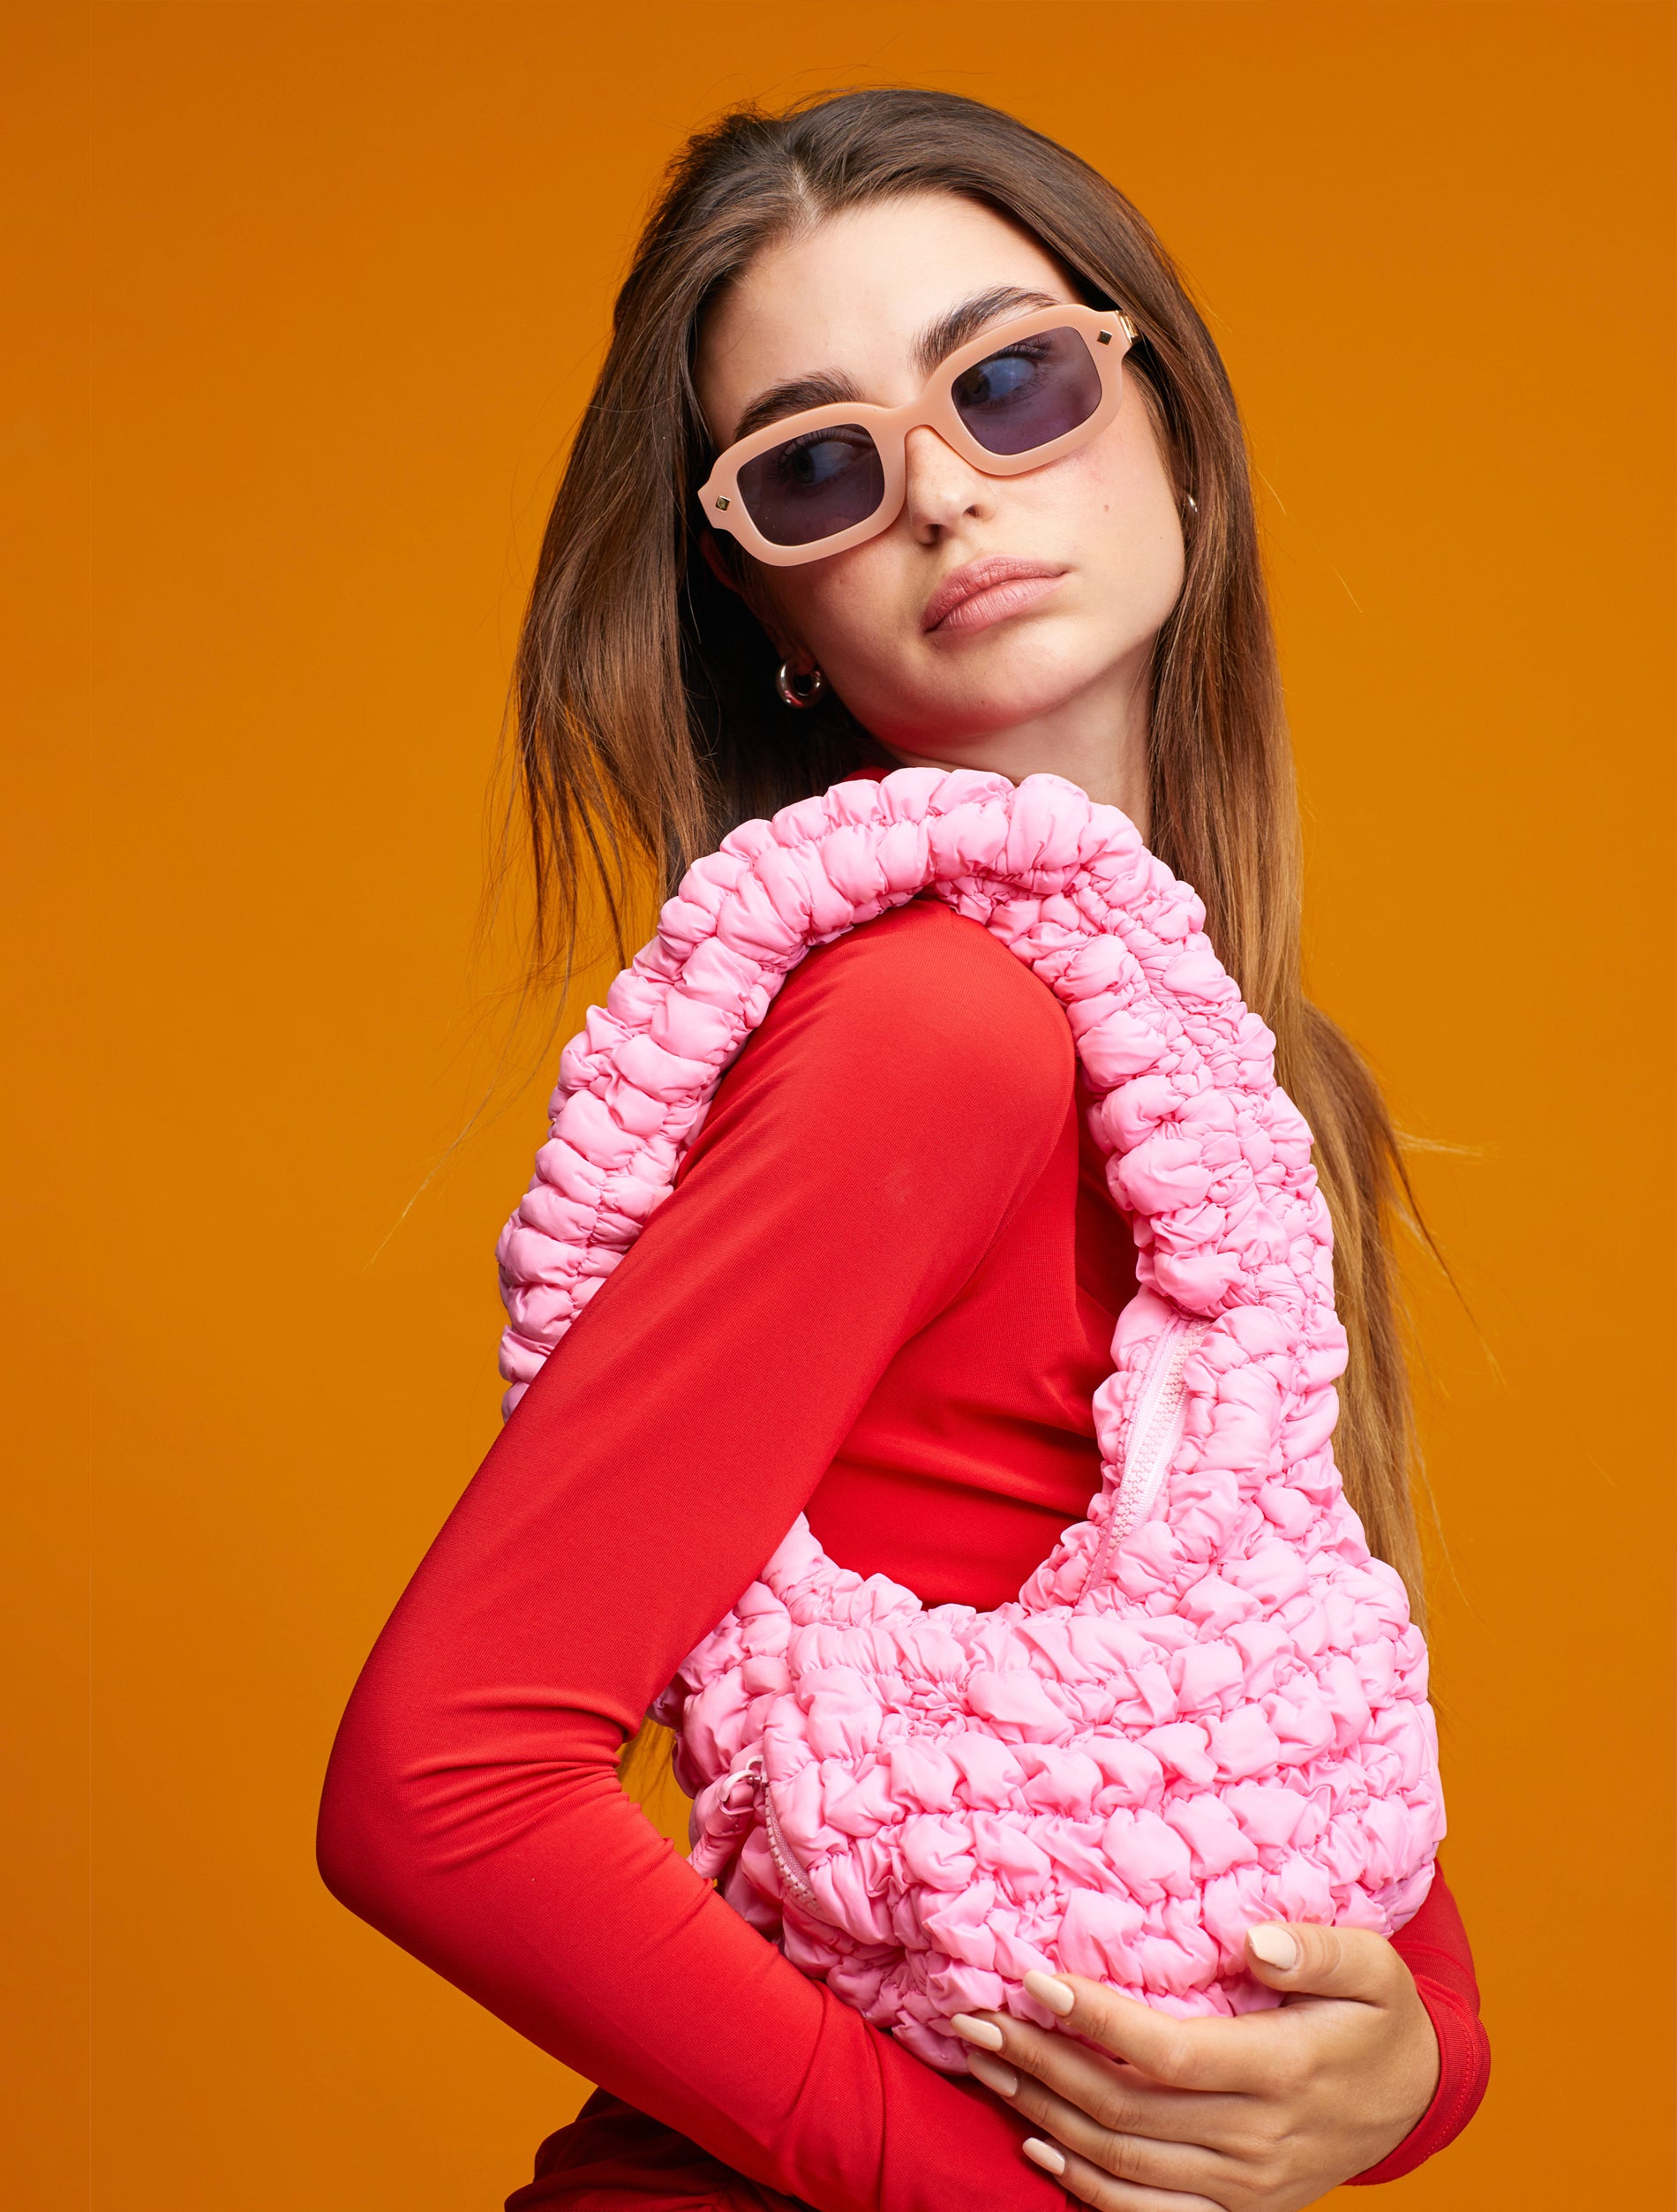 PINK PUFFY BAG DLXVF – No Limit Clothing Store